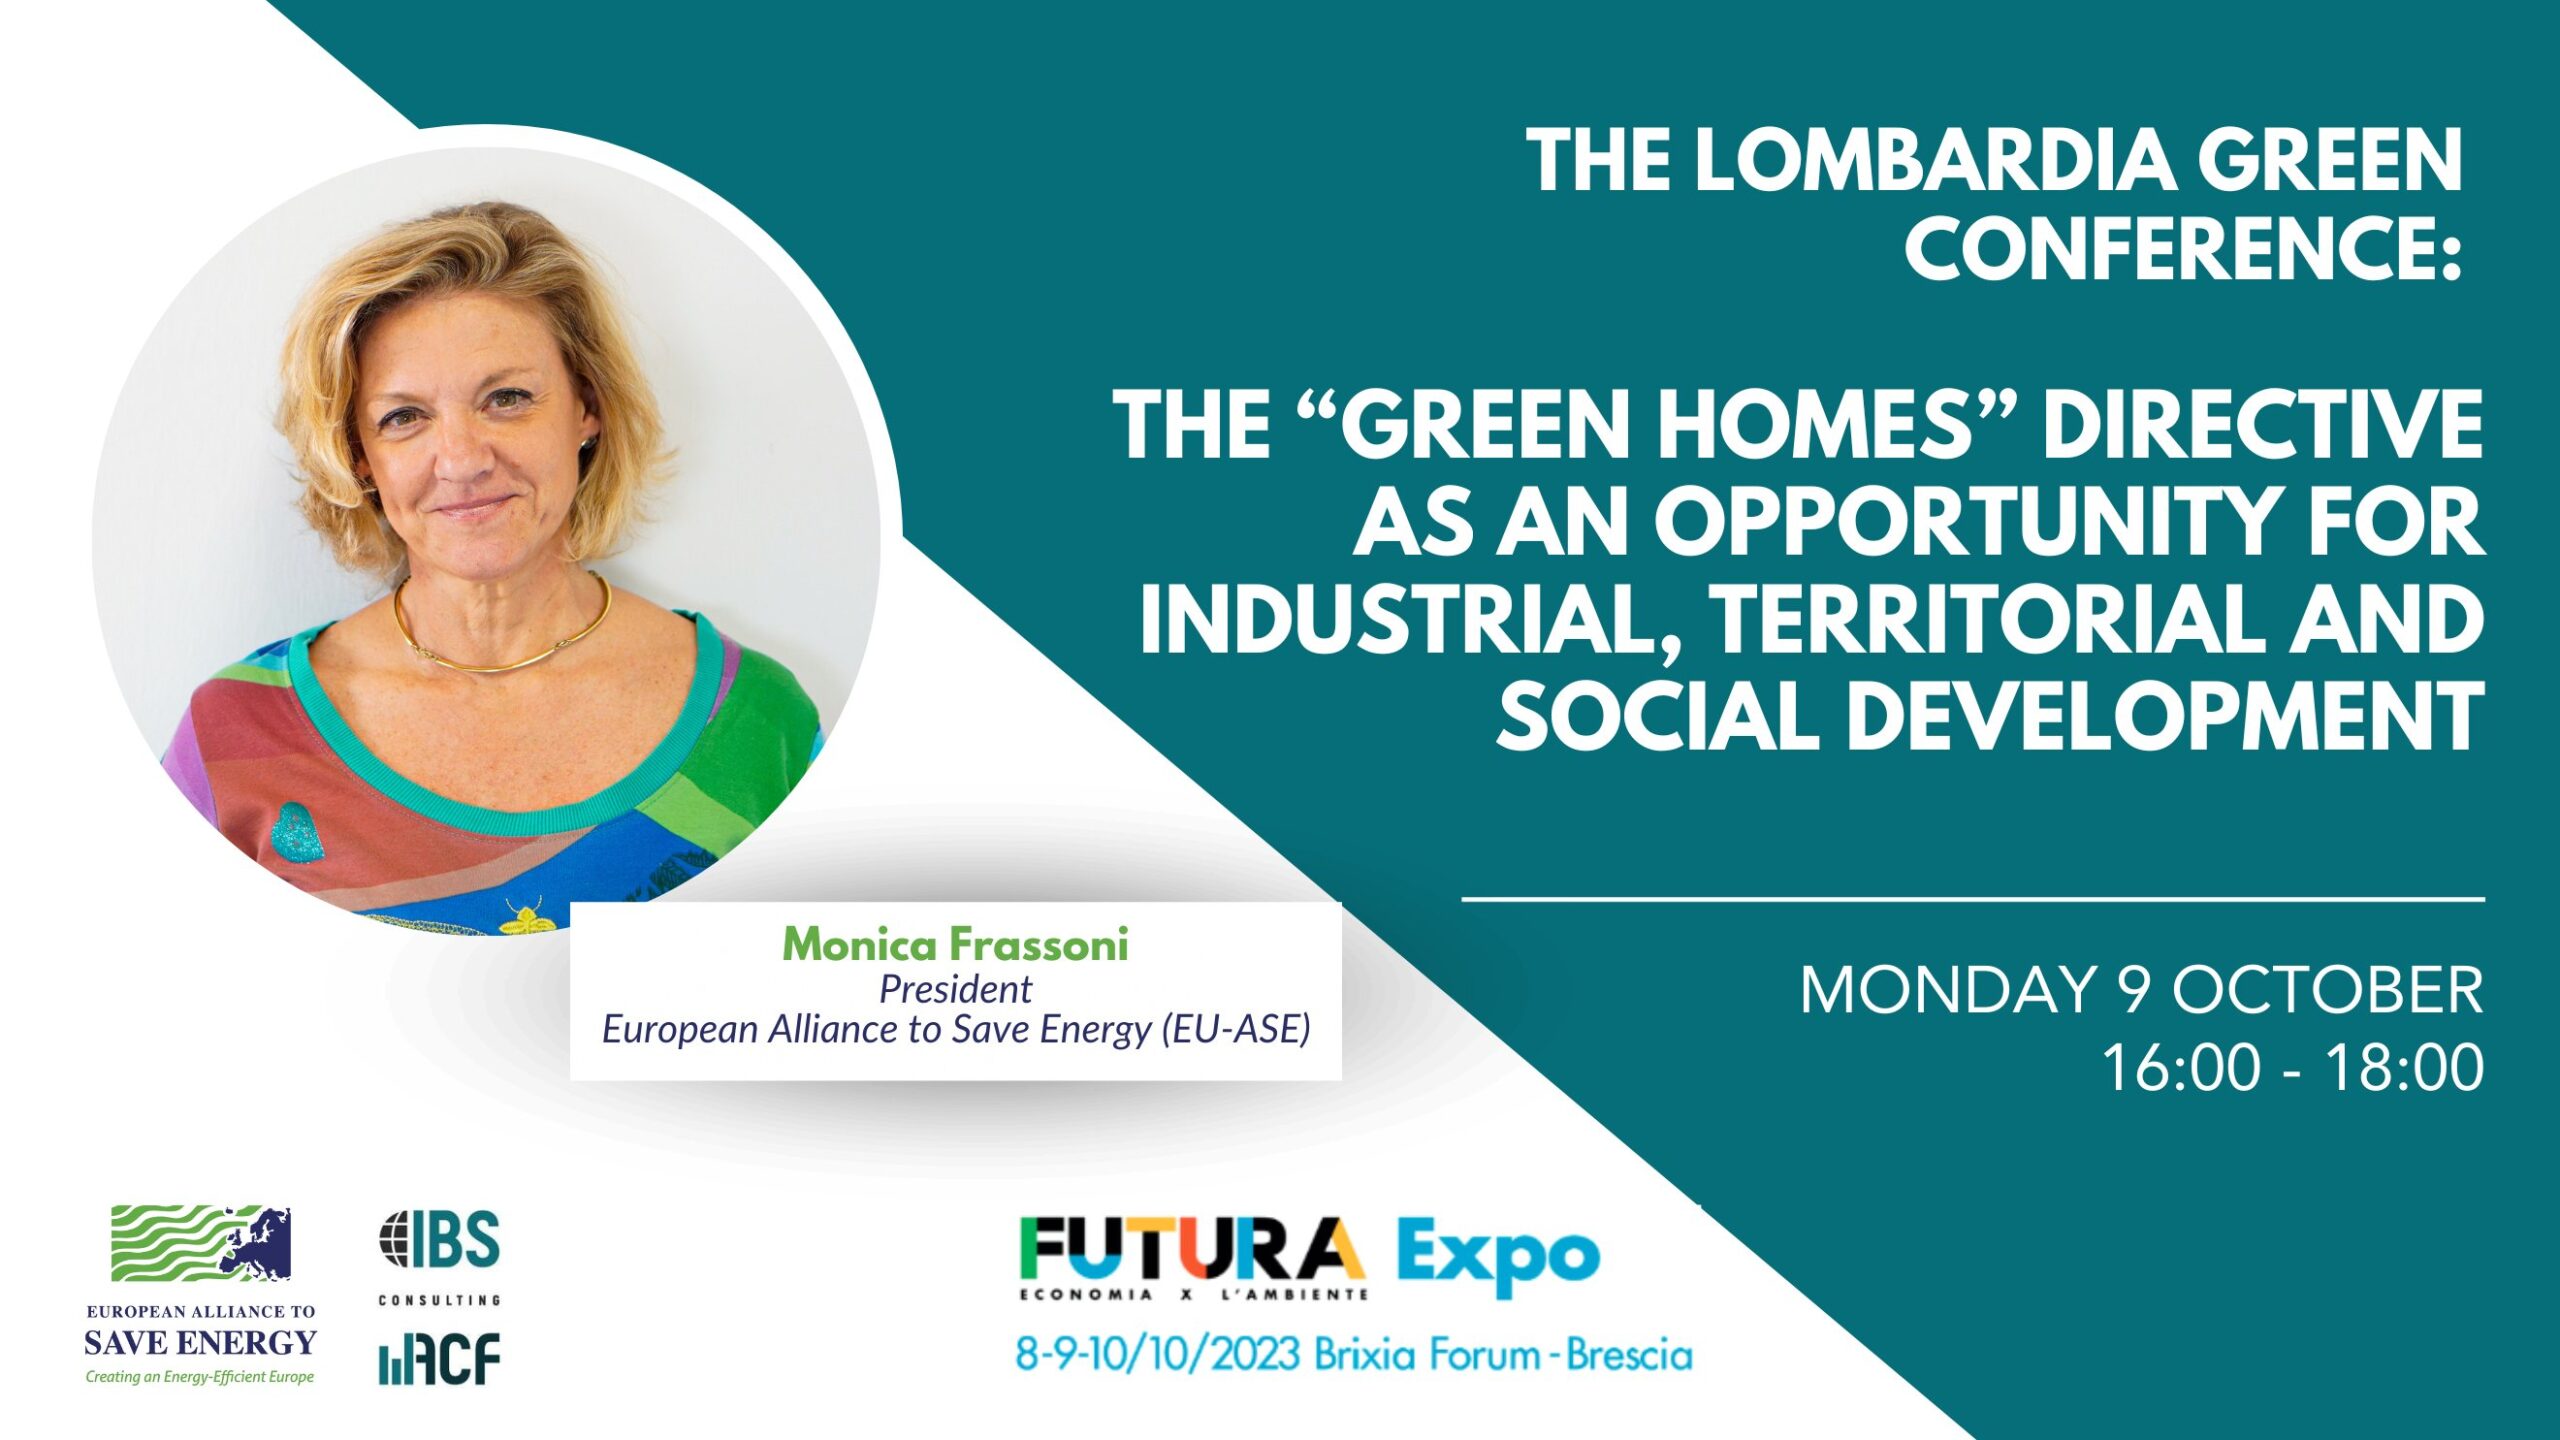 EU-ASE at Lombardia Green Conference: The “Green Homes” Directive as an opportunity for industrial, territorial & social development